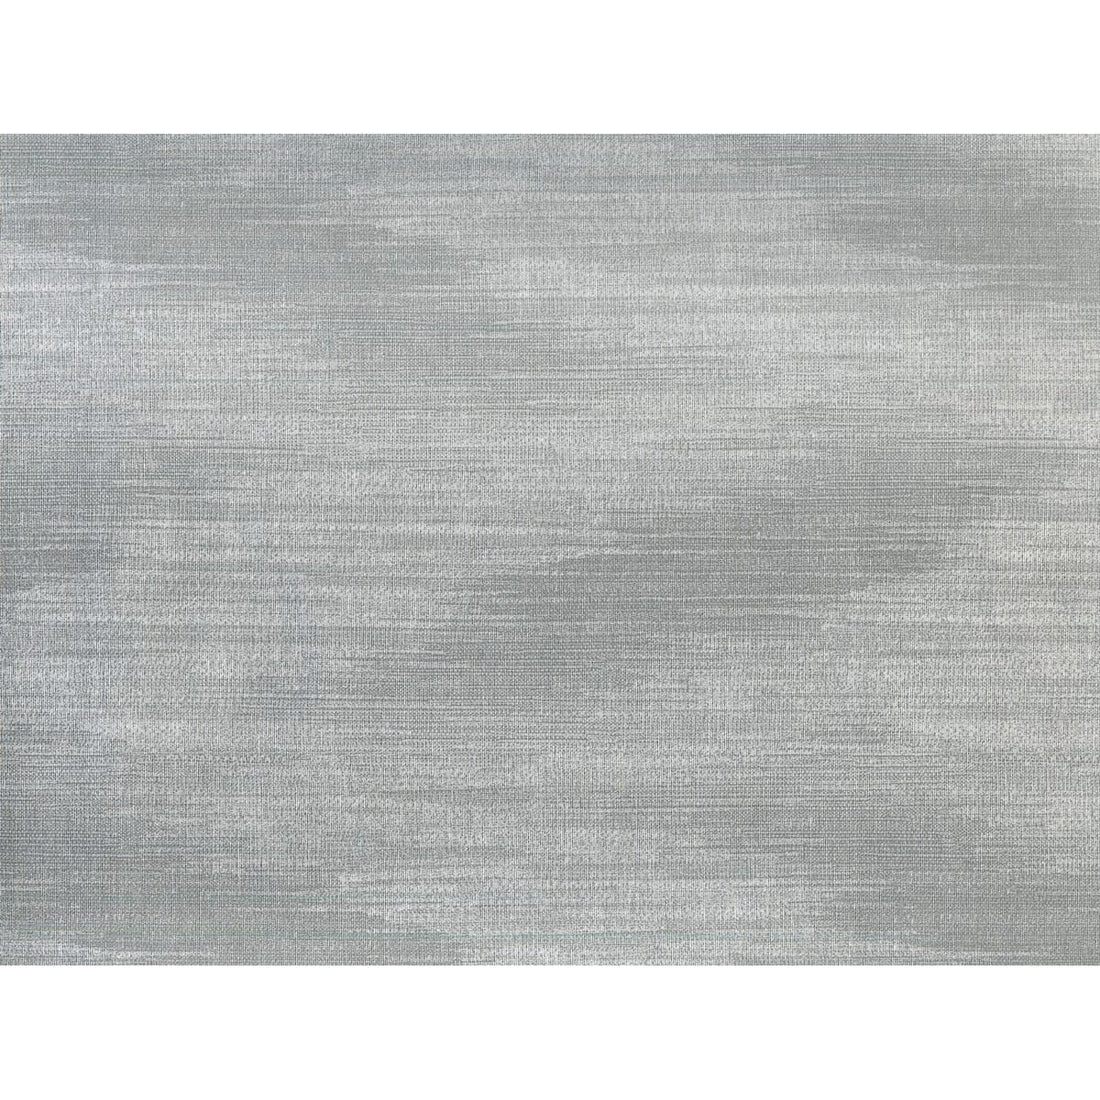 STAIN-PROOF TABLECLOTH GREY 140X175 CM RESINATED COTTON - best price from Maltashopper.com BR480009859